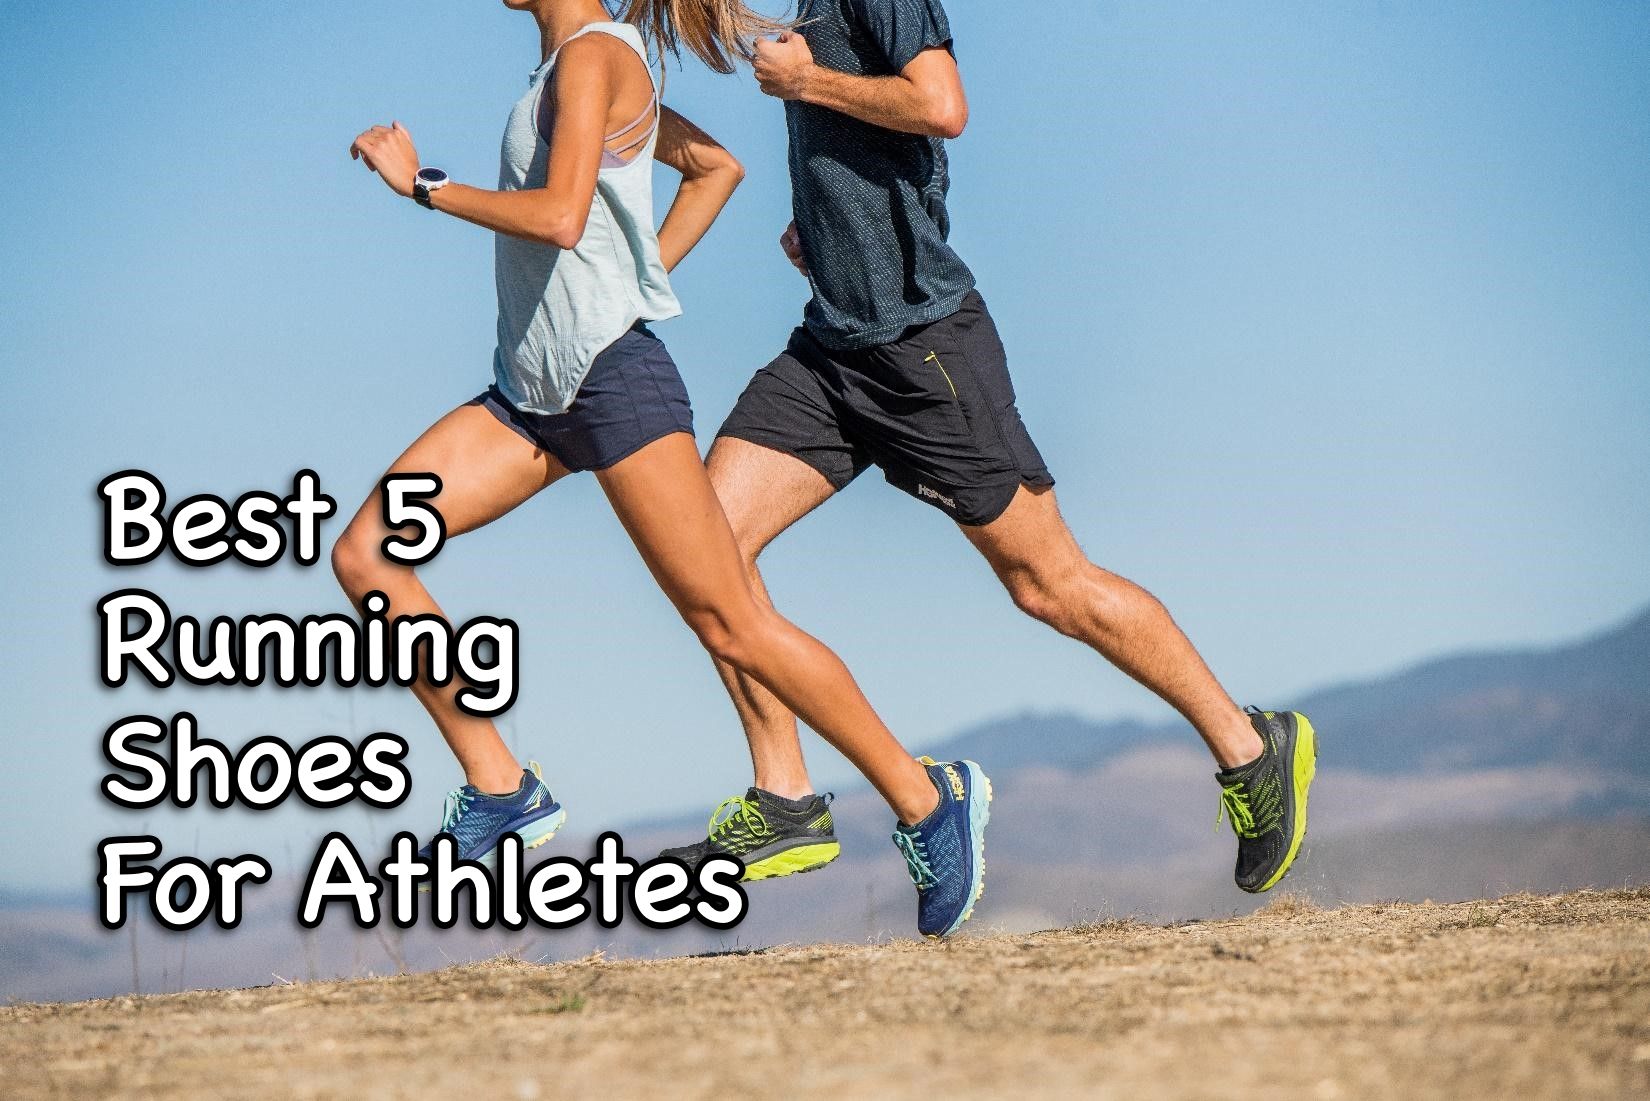 Best 5 Running Shoes For Athletes